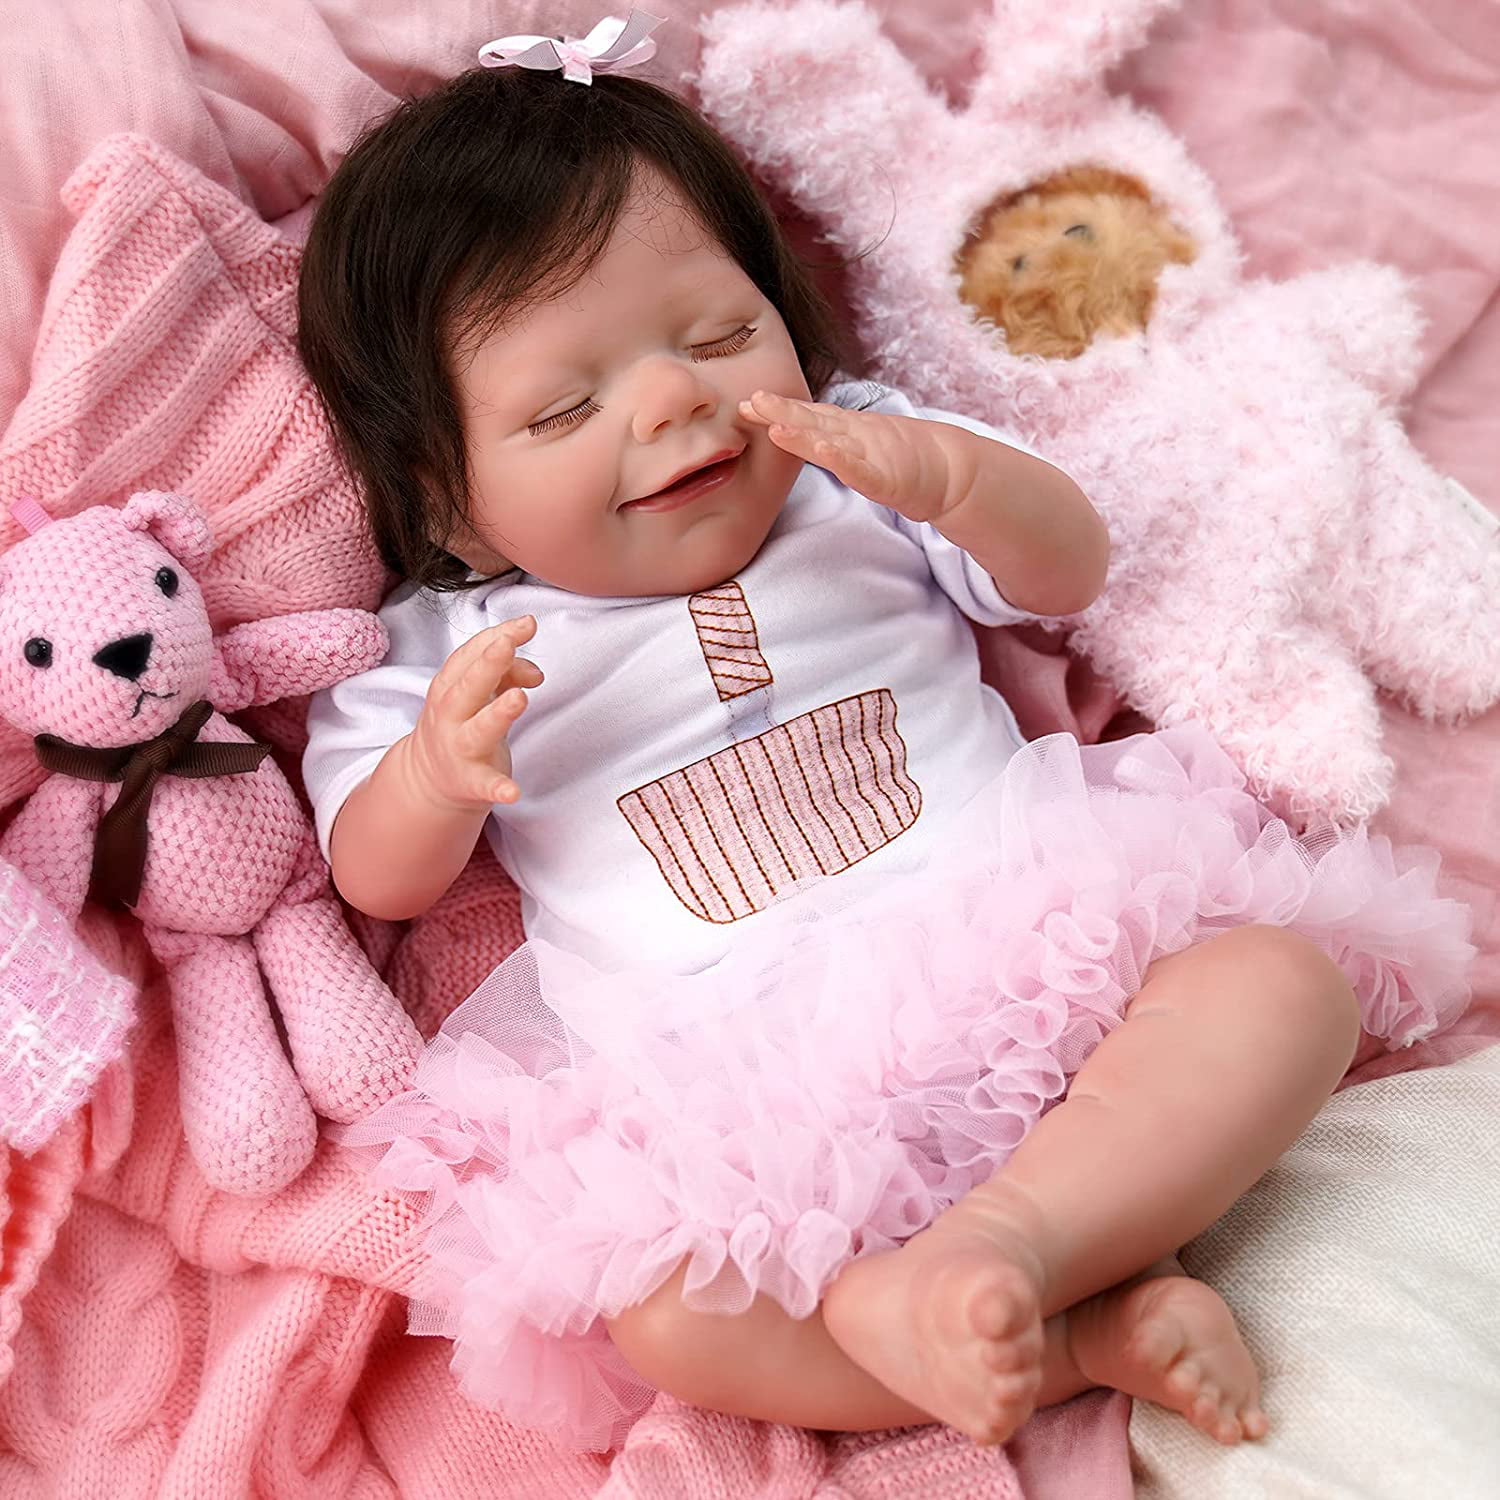 REBORN DOLL HEAVY BABY GIRL PEACH TUTU OUTFIT MAGNETIC DUMMY E 